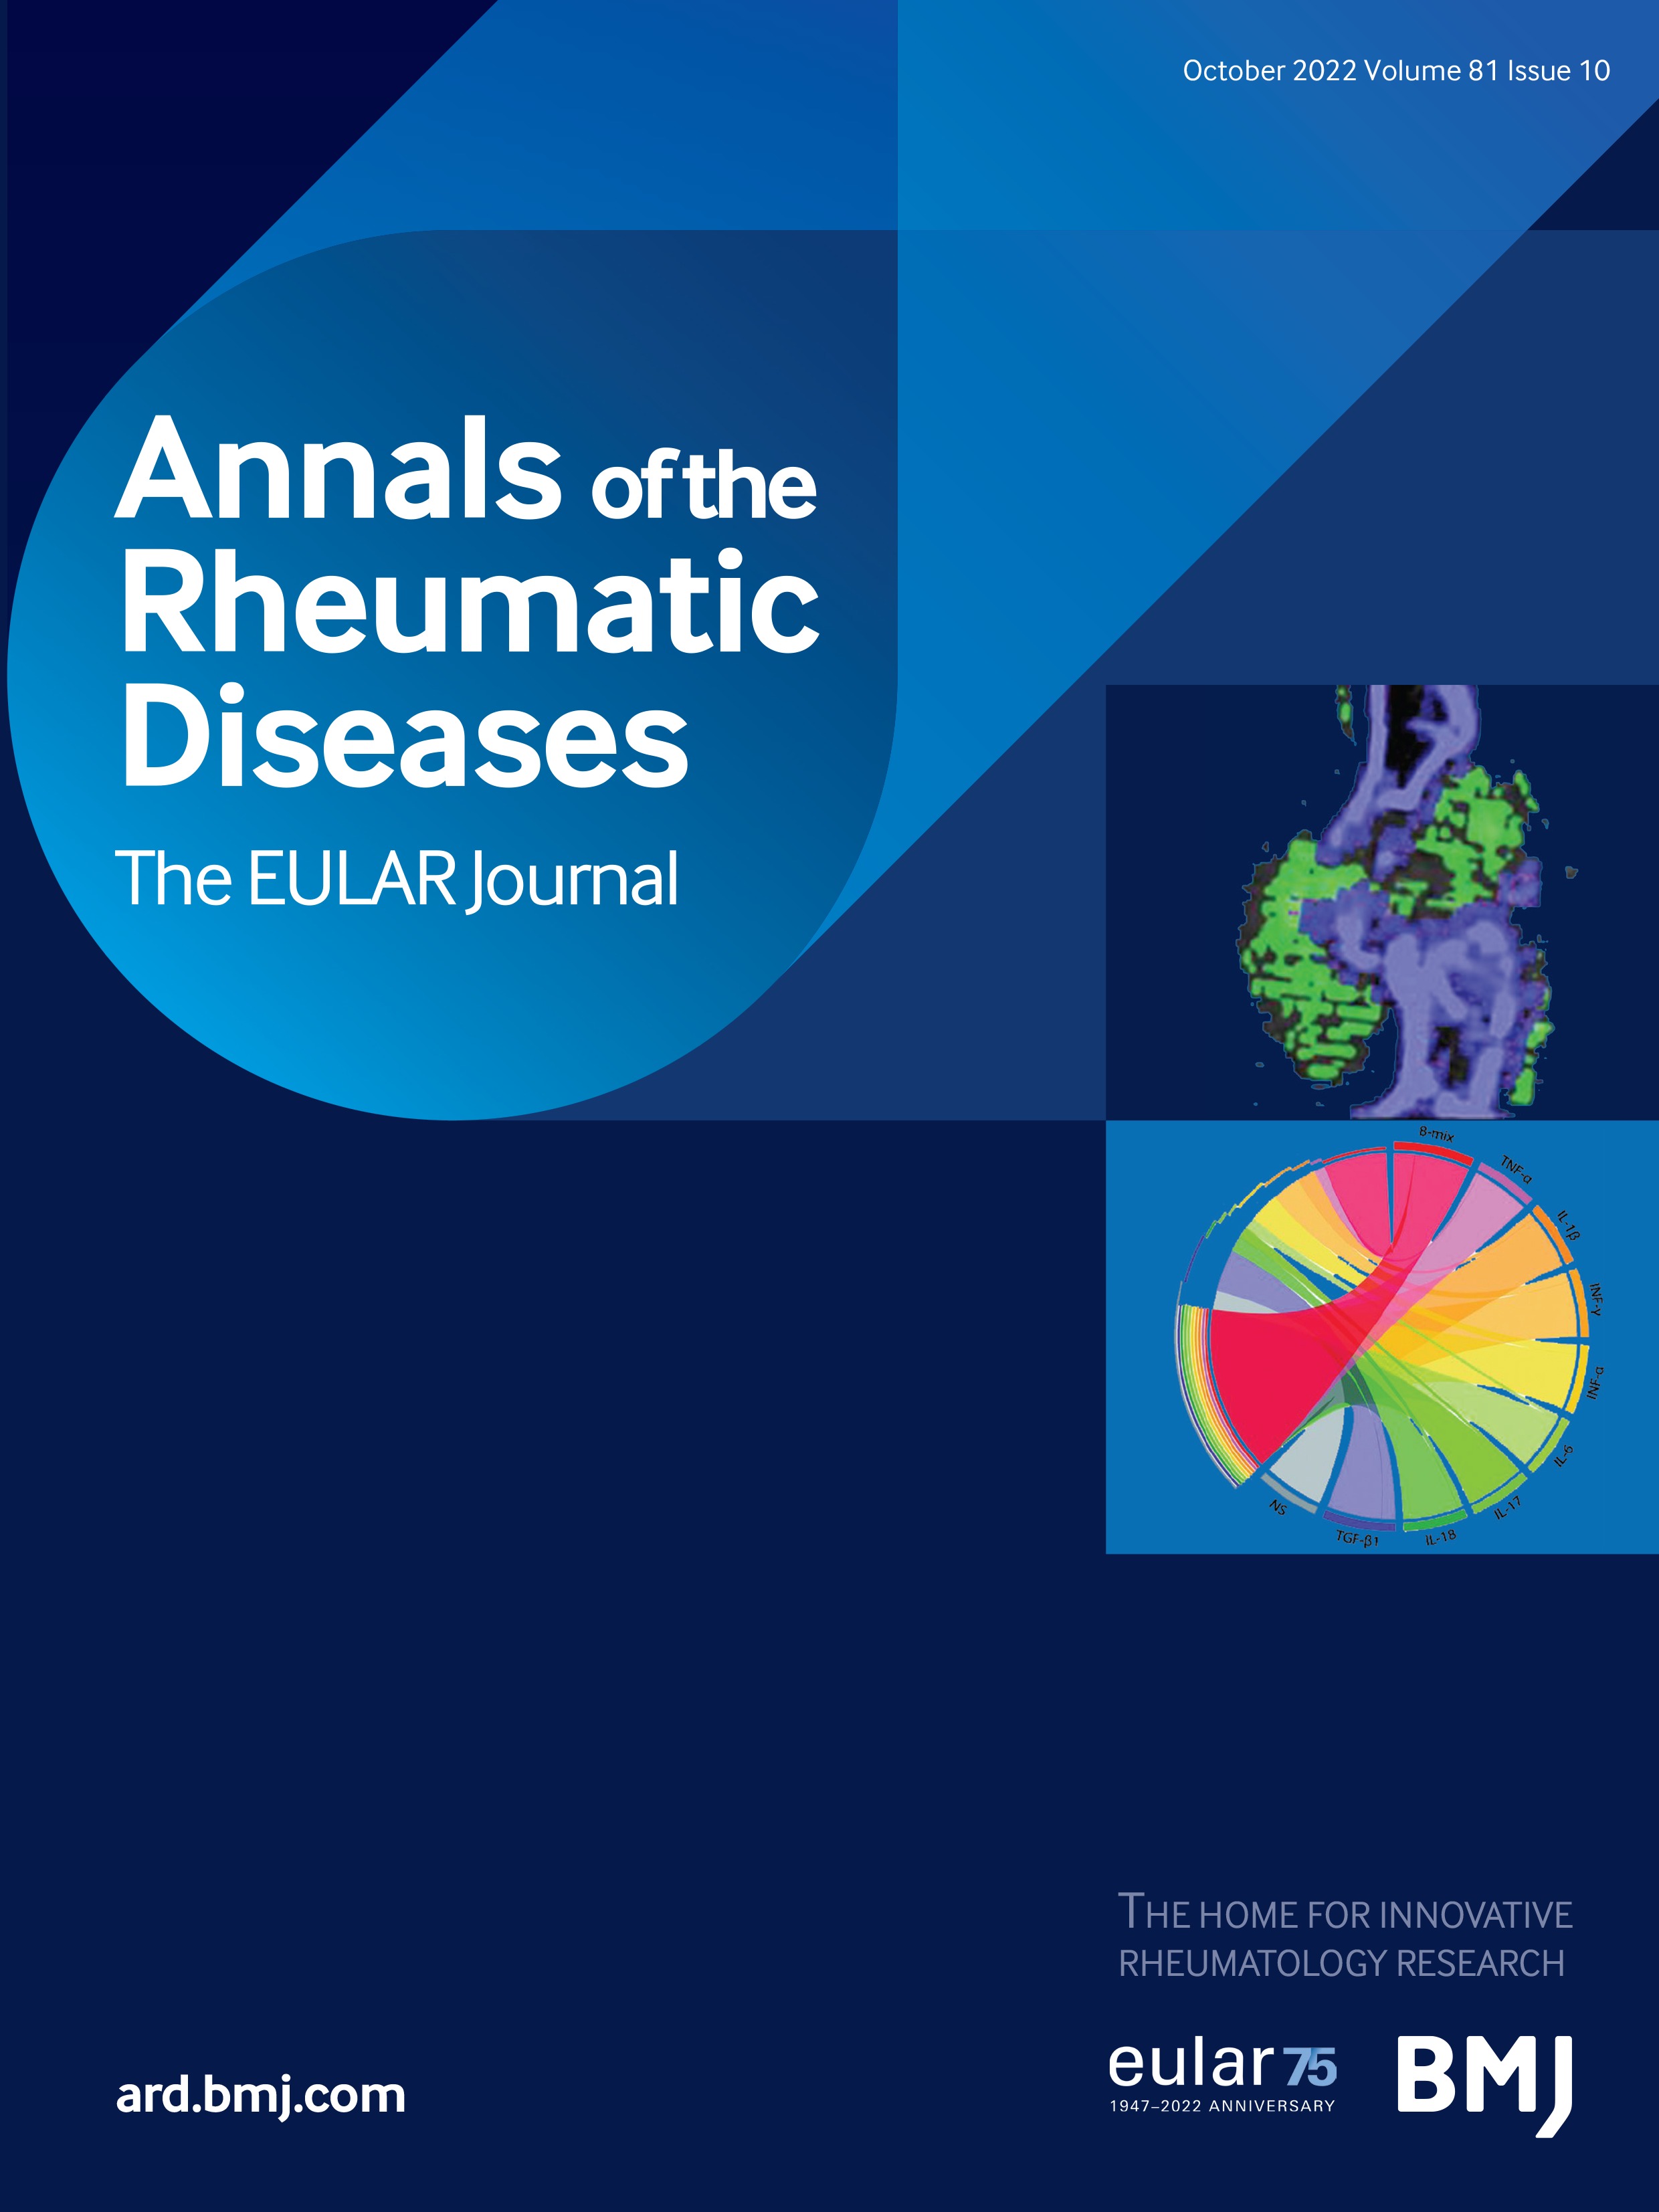 Comment on 'Characteristics associated with hospitalisation for COVID-19 in people with rheumatic disease: data from the COVID-19 global rheumatology alliance physician-reported registry by Gianfrancesco M et al